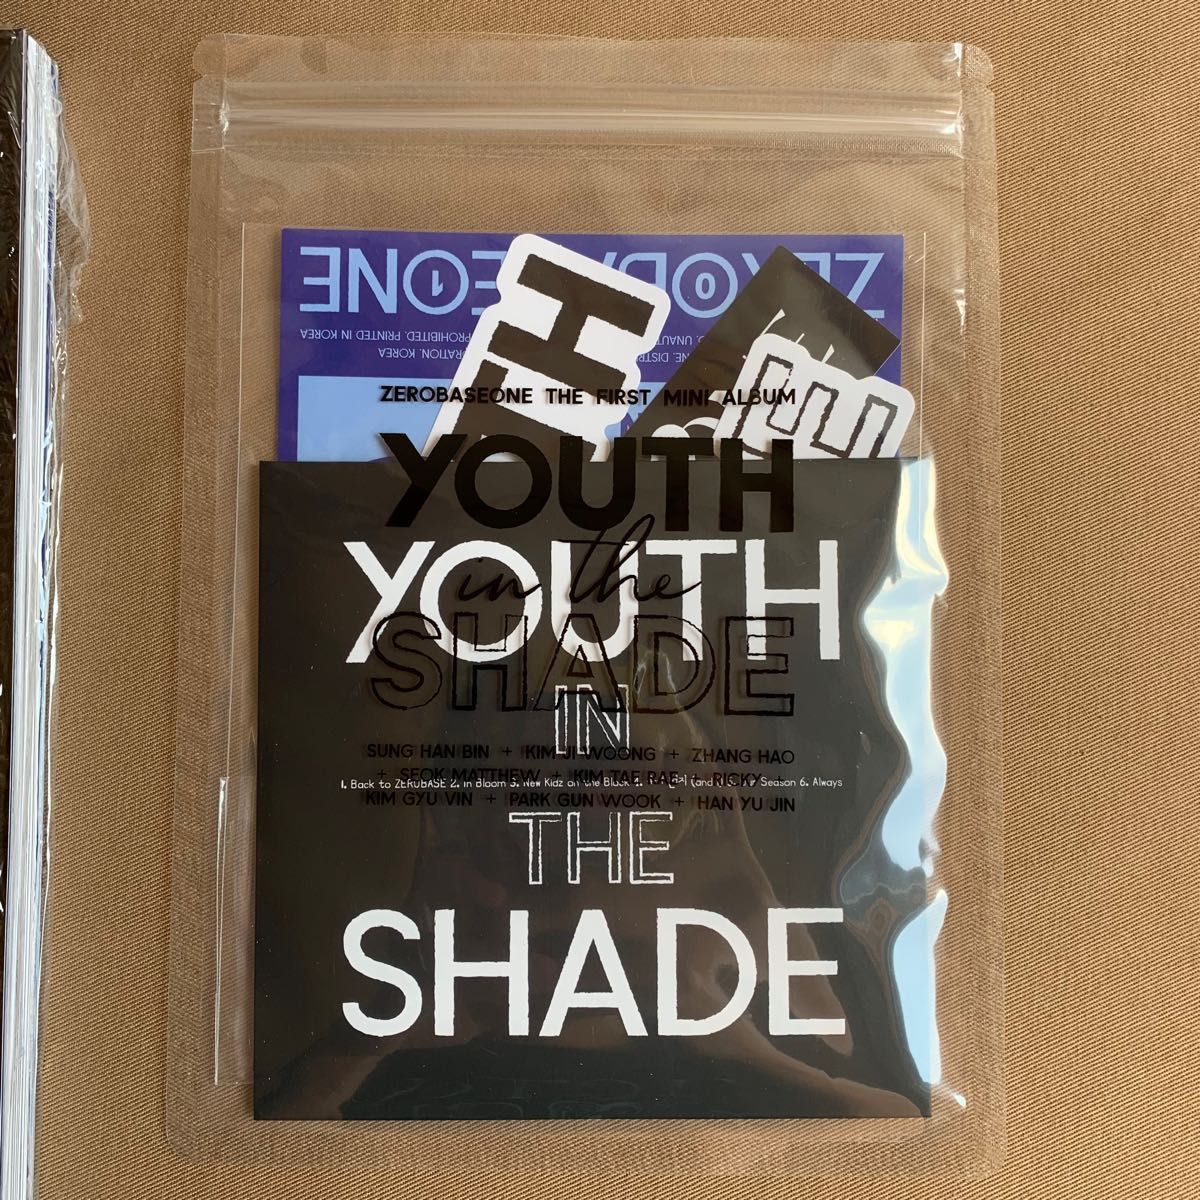 ZB1 ZEROBASEONE YOUTH IN THE SHADE YOUTH ver. キムテレくん コンプリートセット